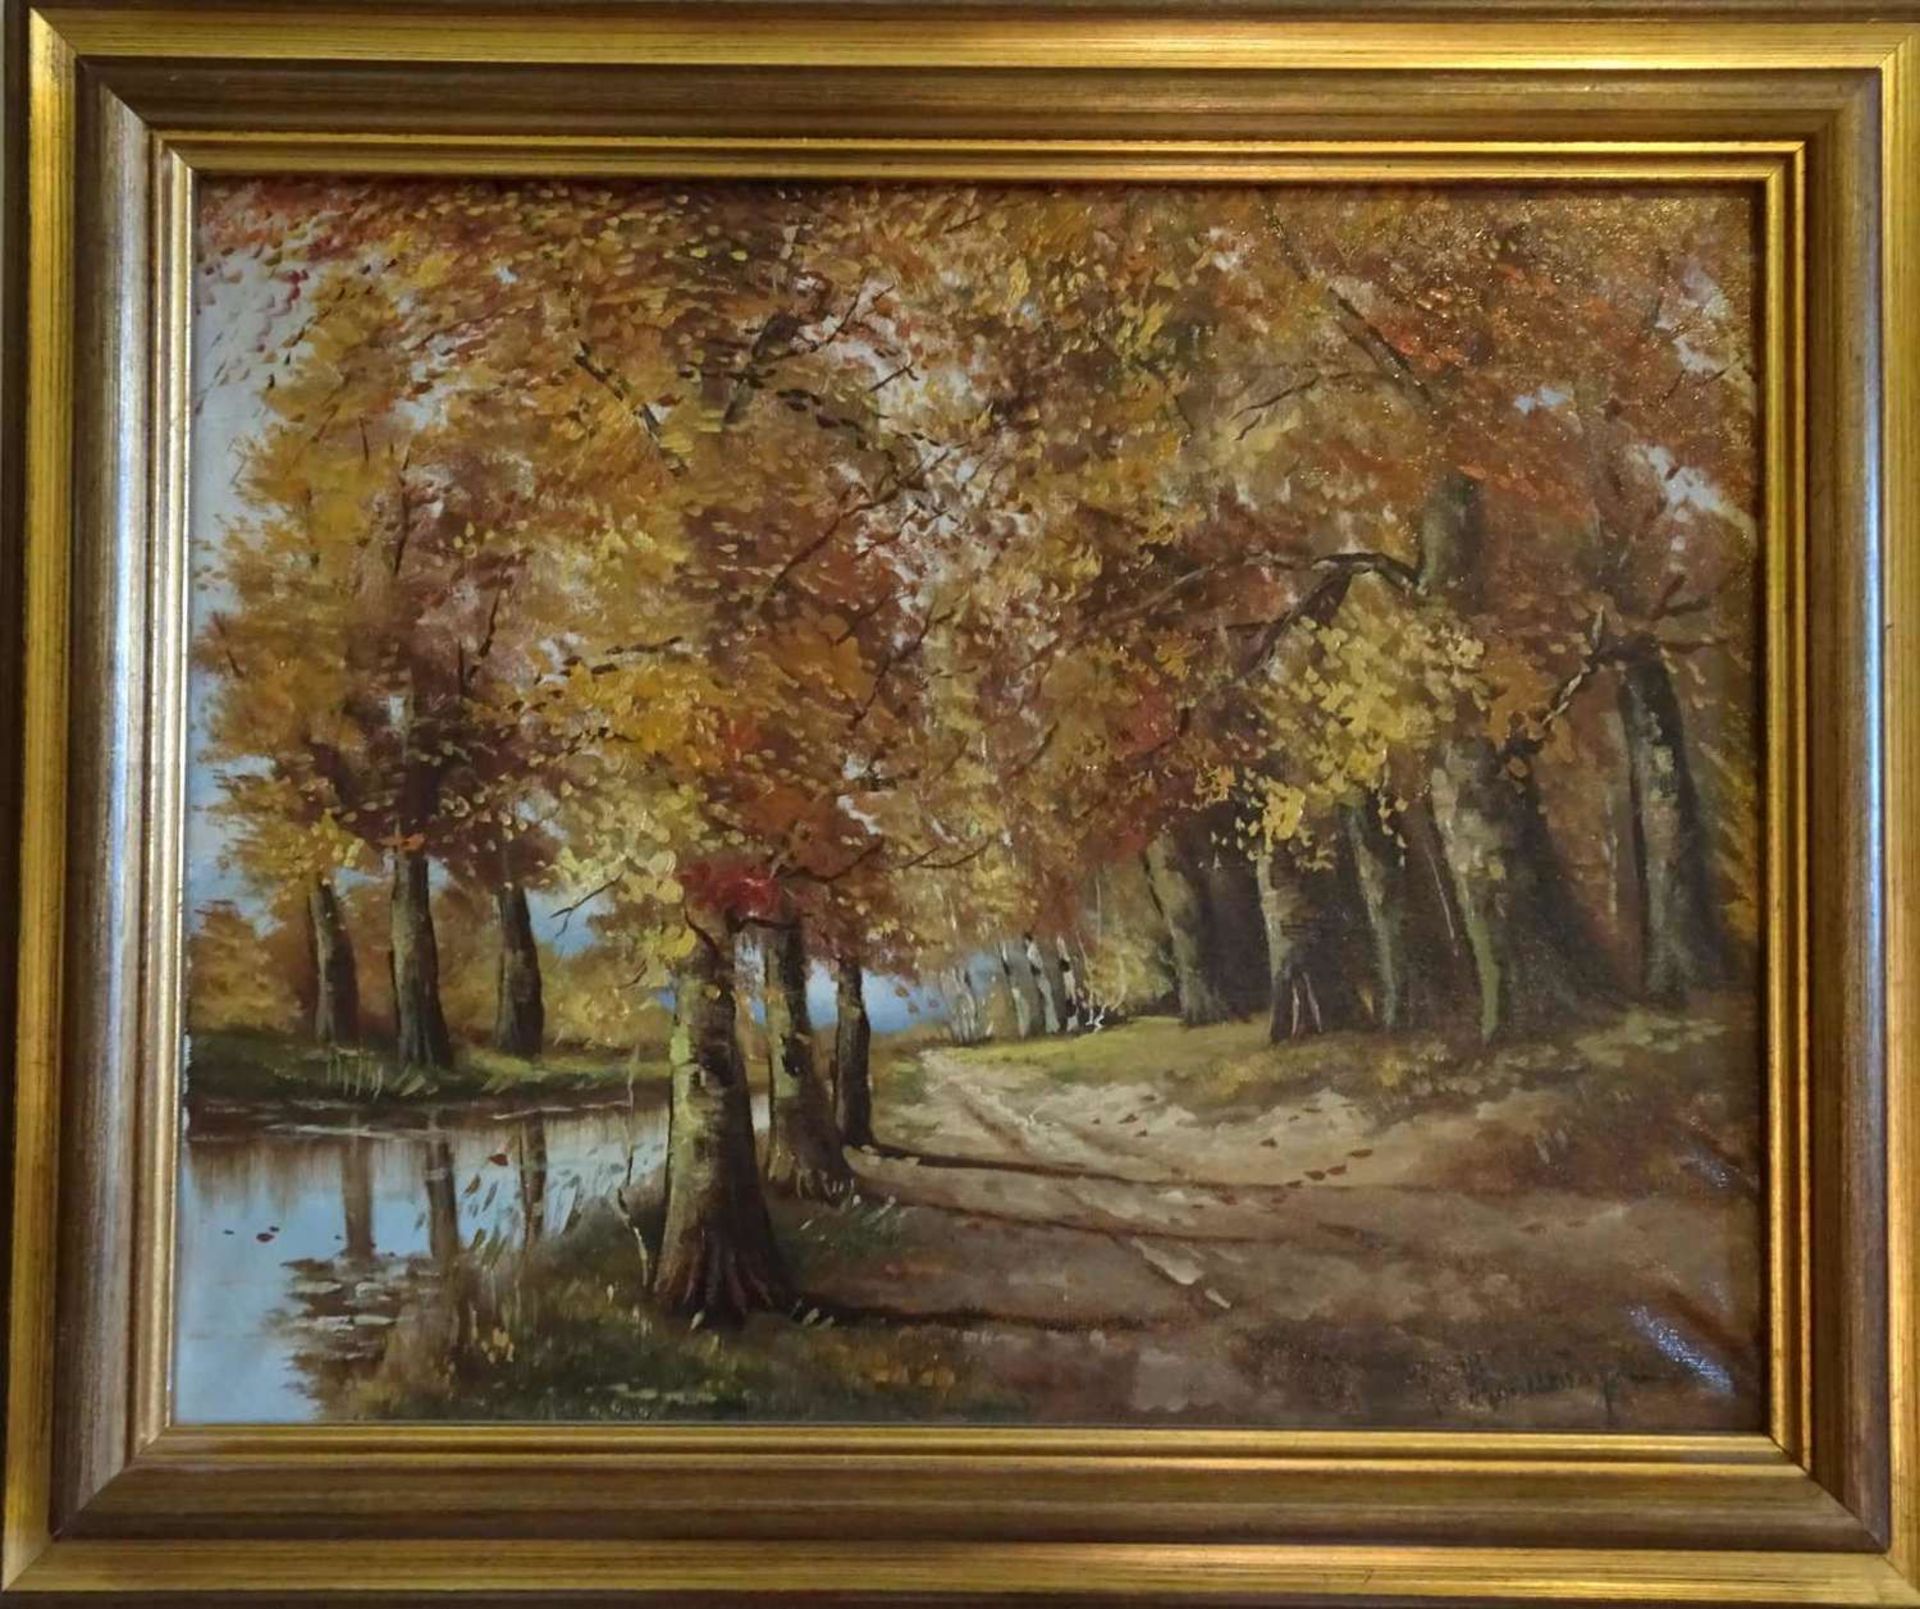 Oil painting on canvas "Forest path with lake", illegible signature below right. Framed.